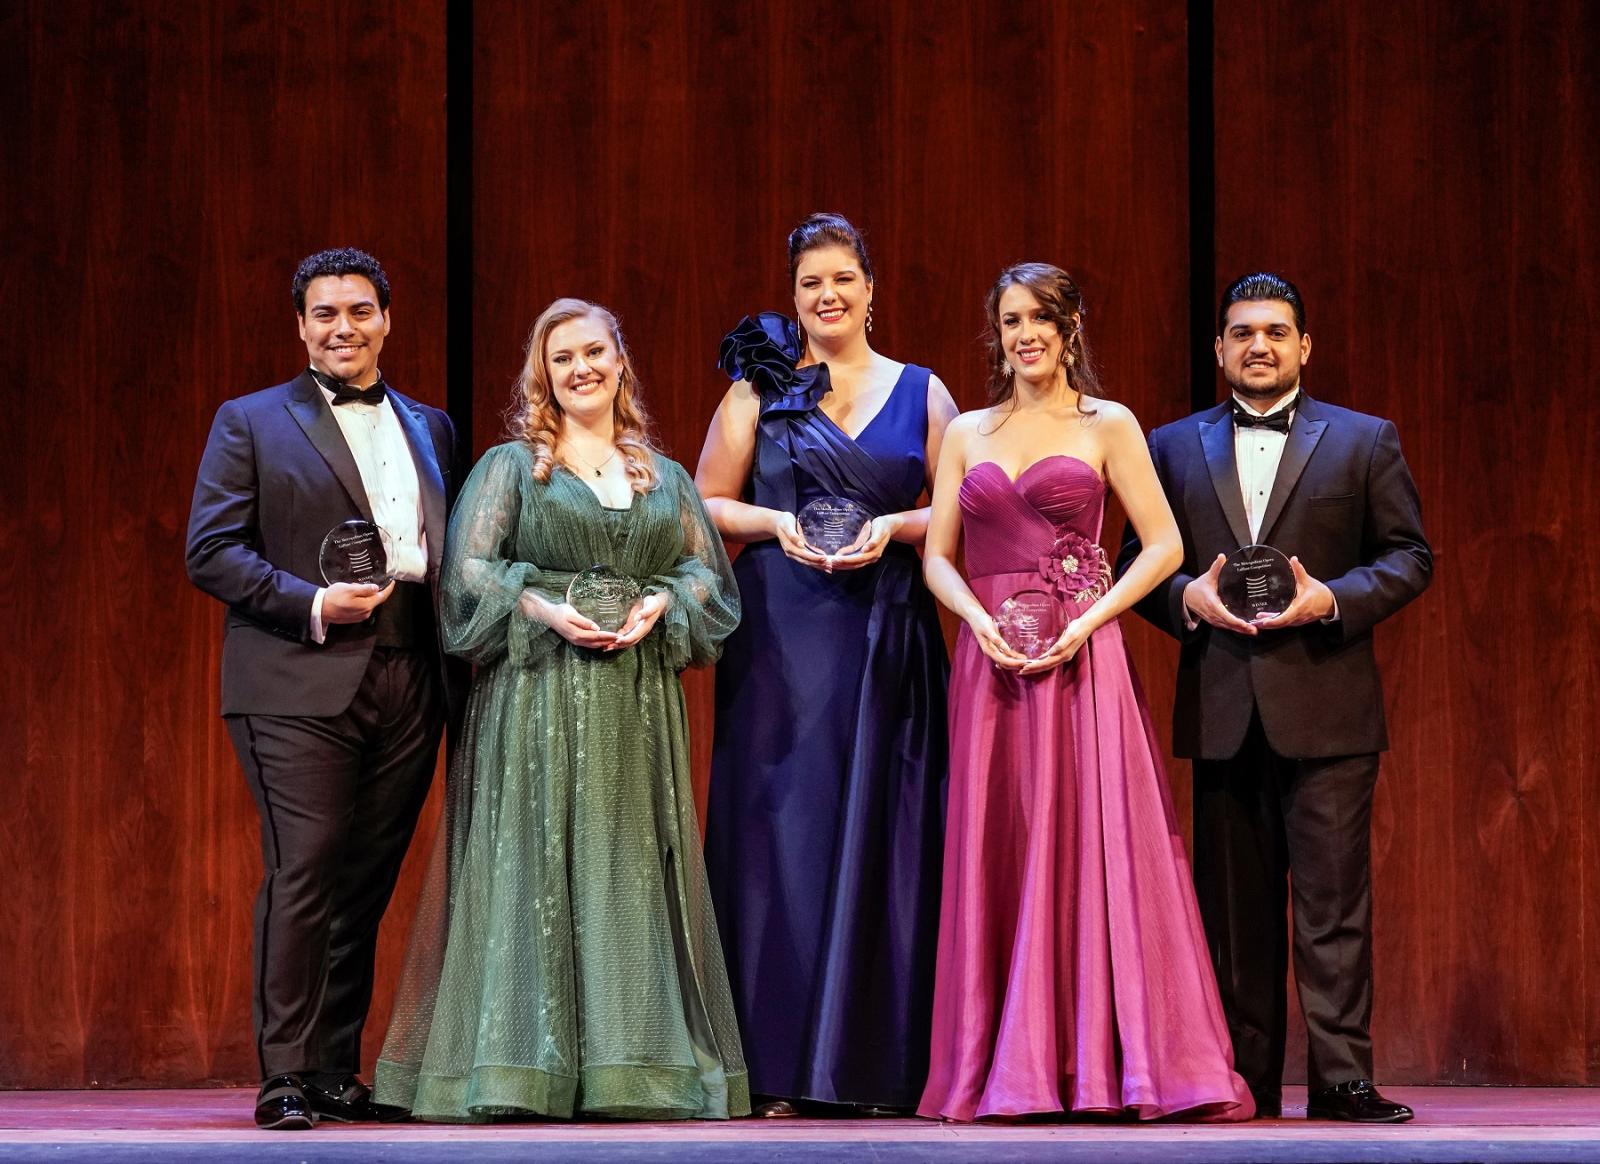 Emily Richter (center) is joined by the other four winners of the Met opera competition.